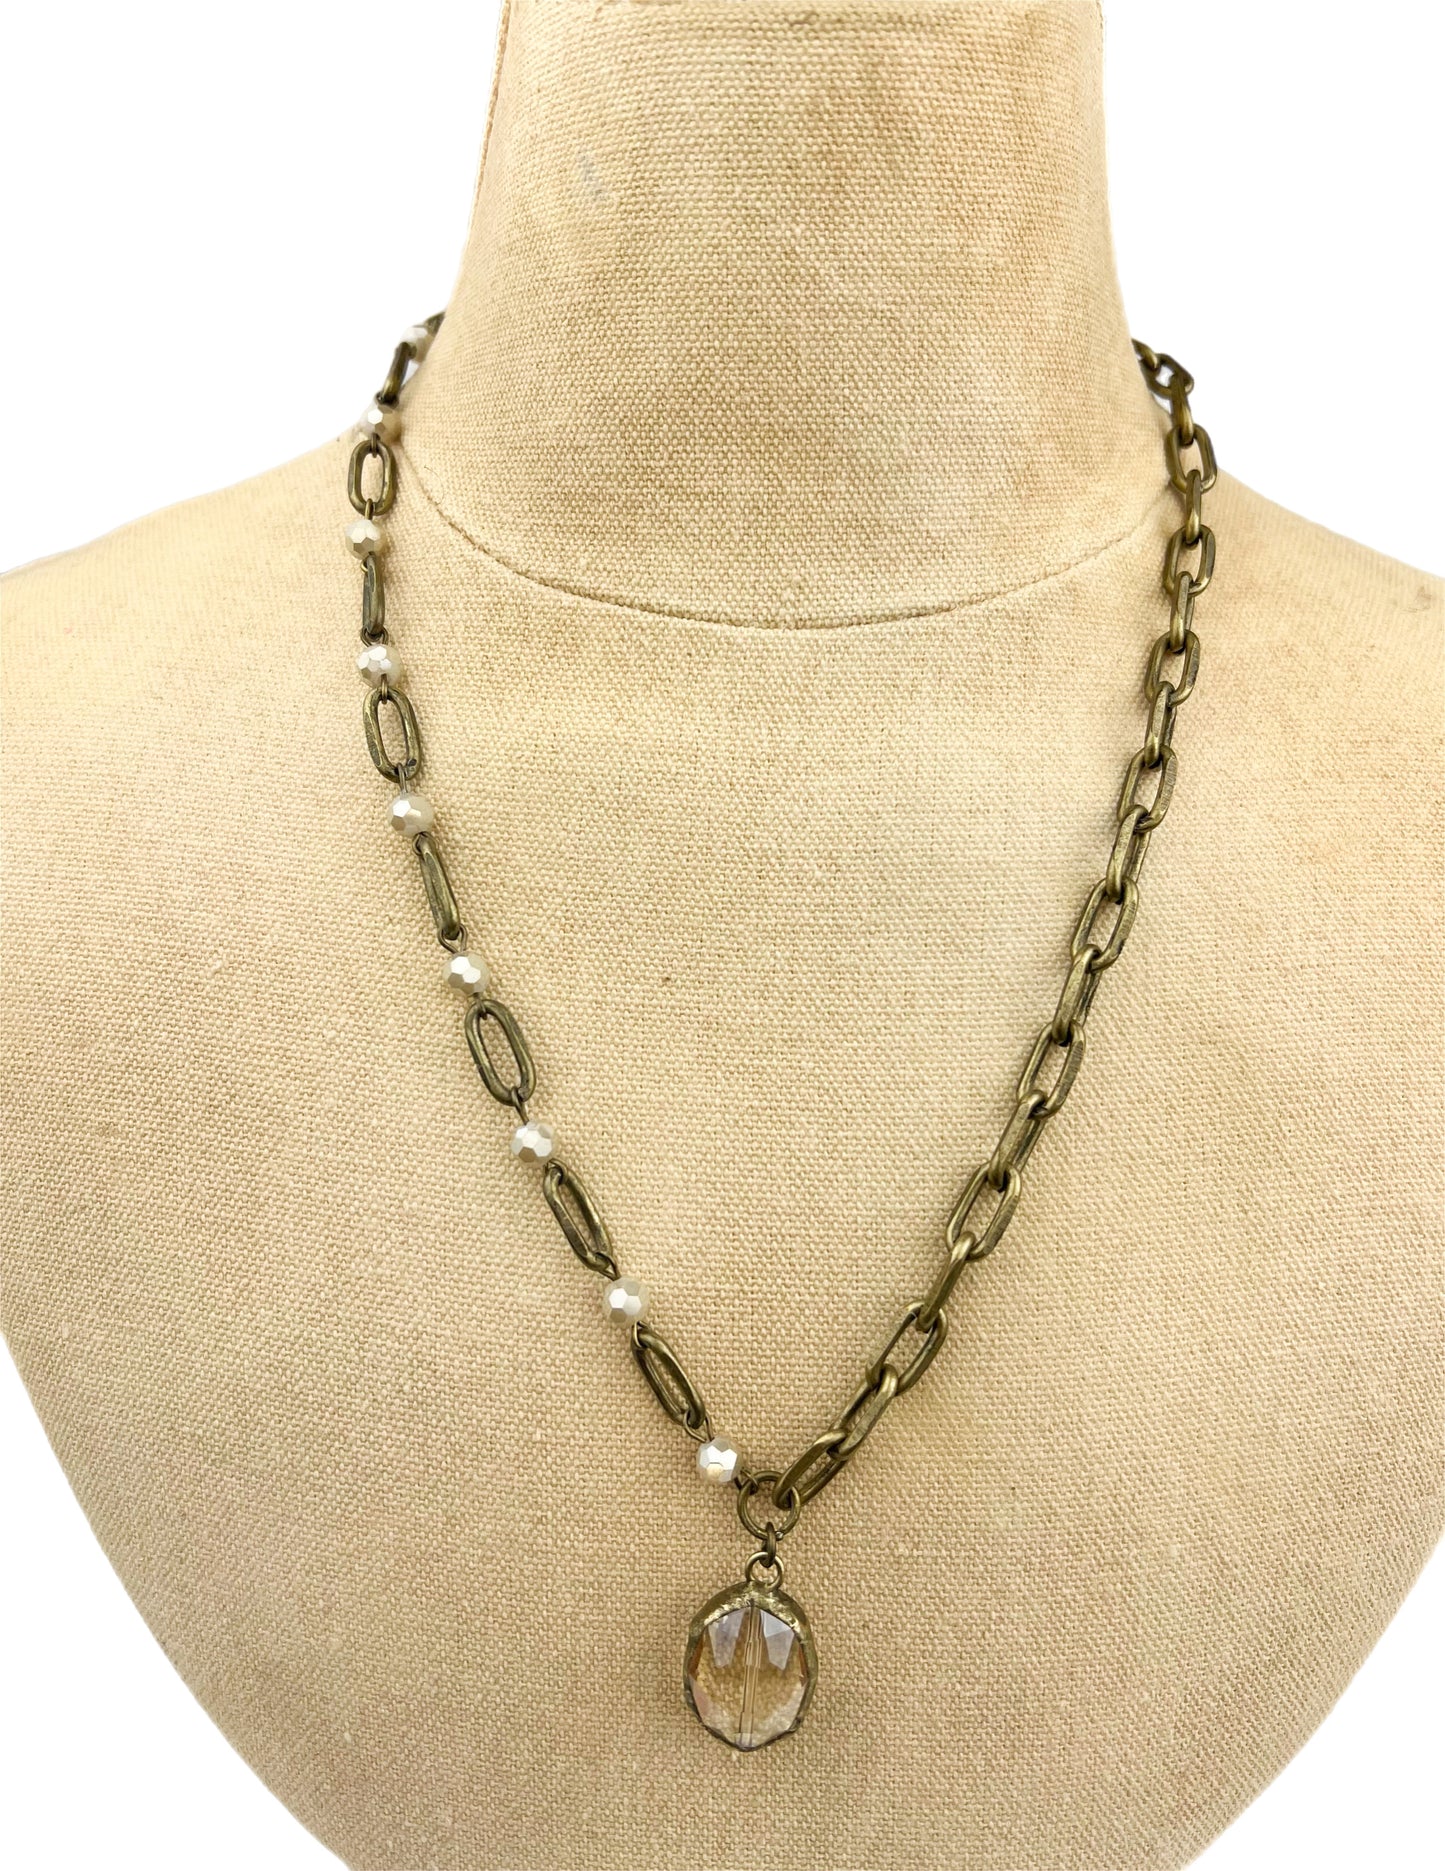 18" - 20" Linked Chain & Ivory Necklace with Round Crystal Pendant